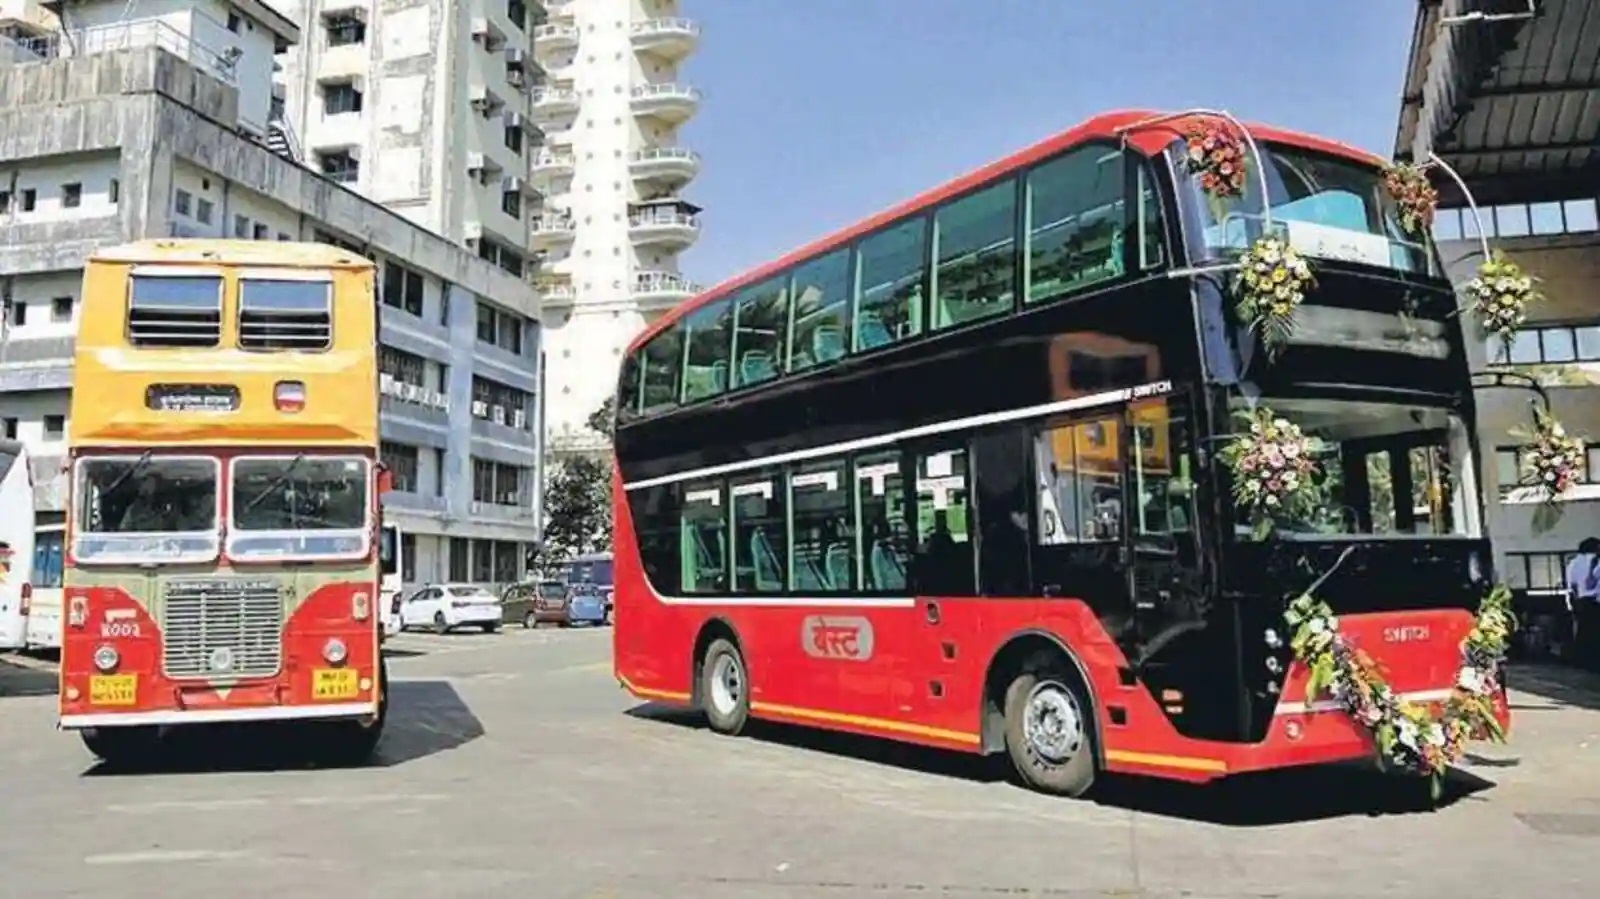 Country’s first electric air-conditioned double decker bus hit the streets of Mumbai